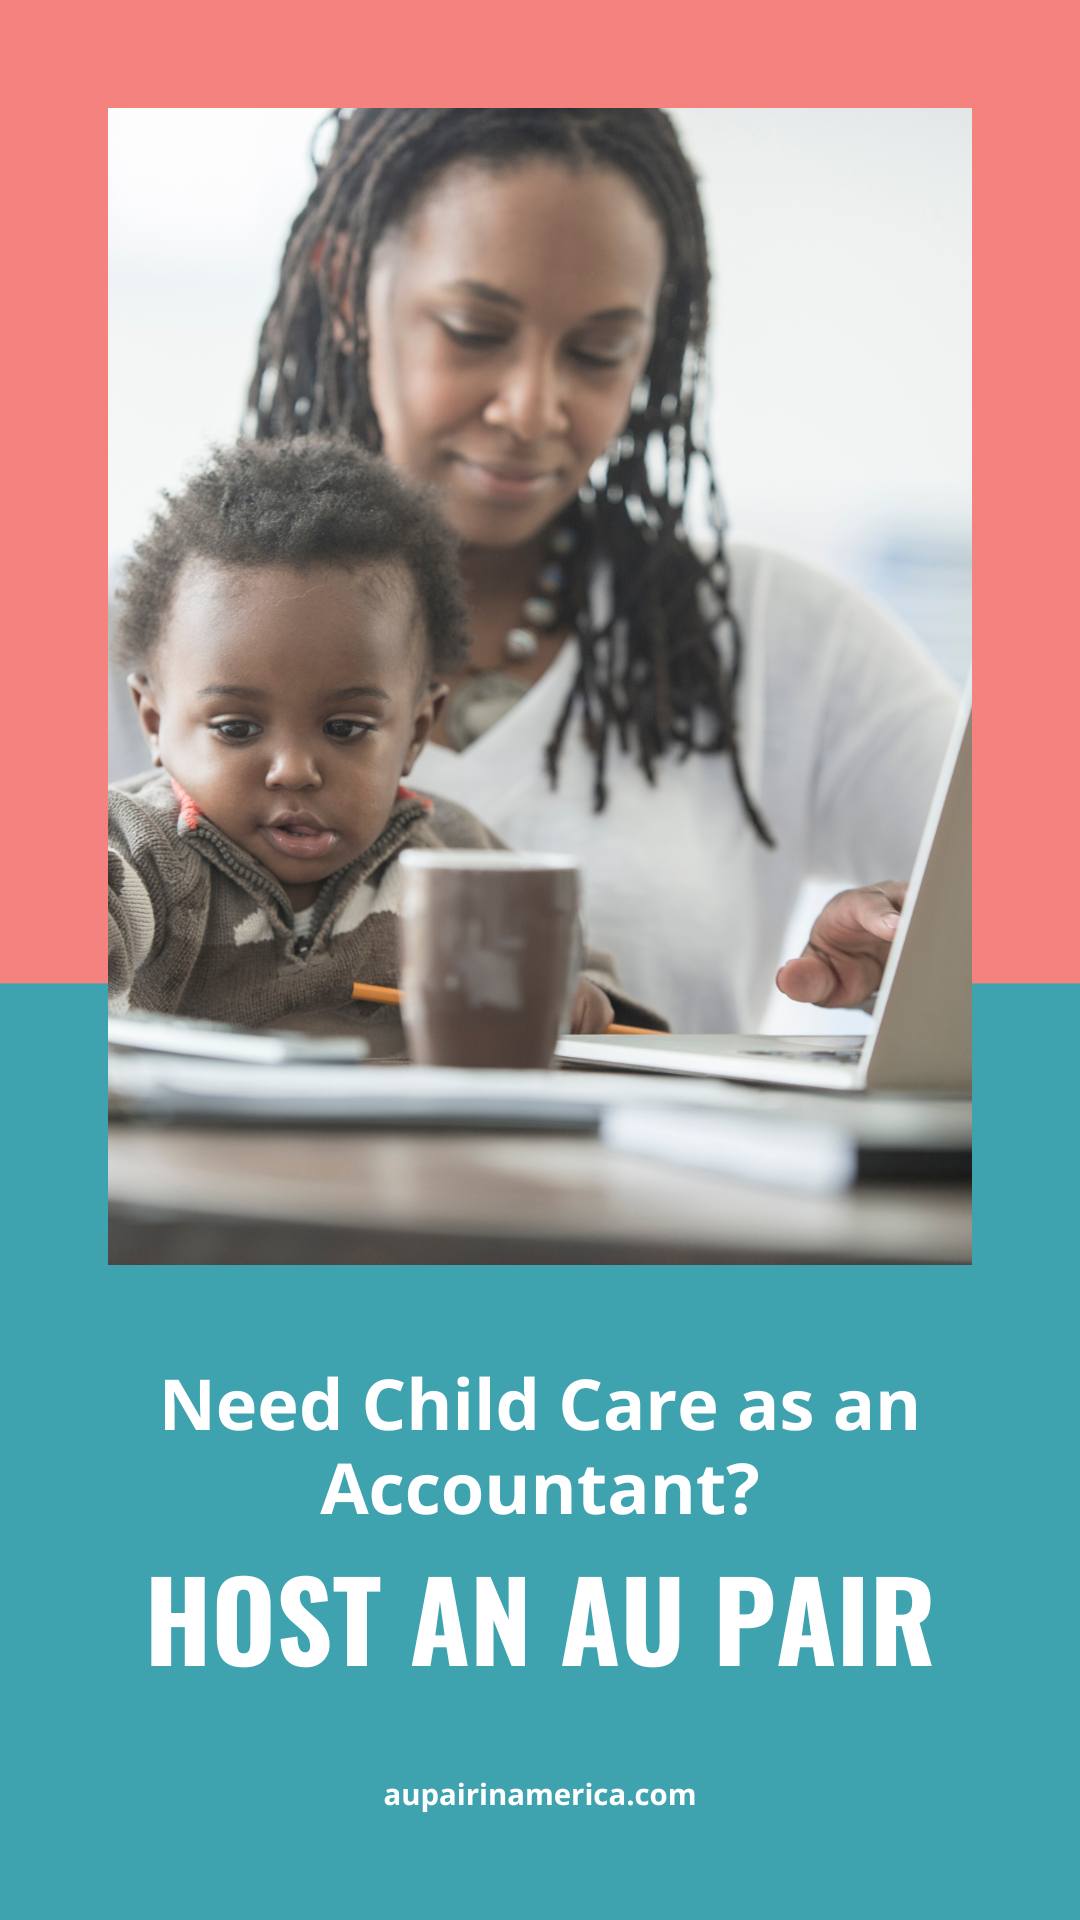 Pin image: Working professional mother with young child with text overlay saying "Need Child Care as an Accountant? Host an Au Pair"